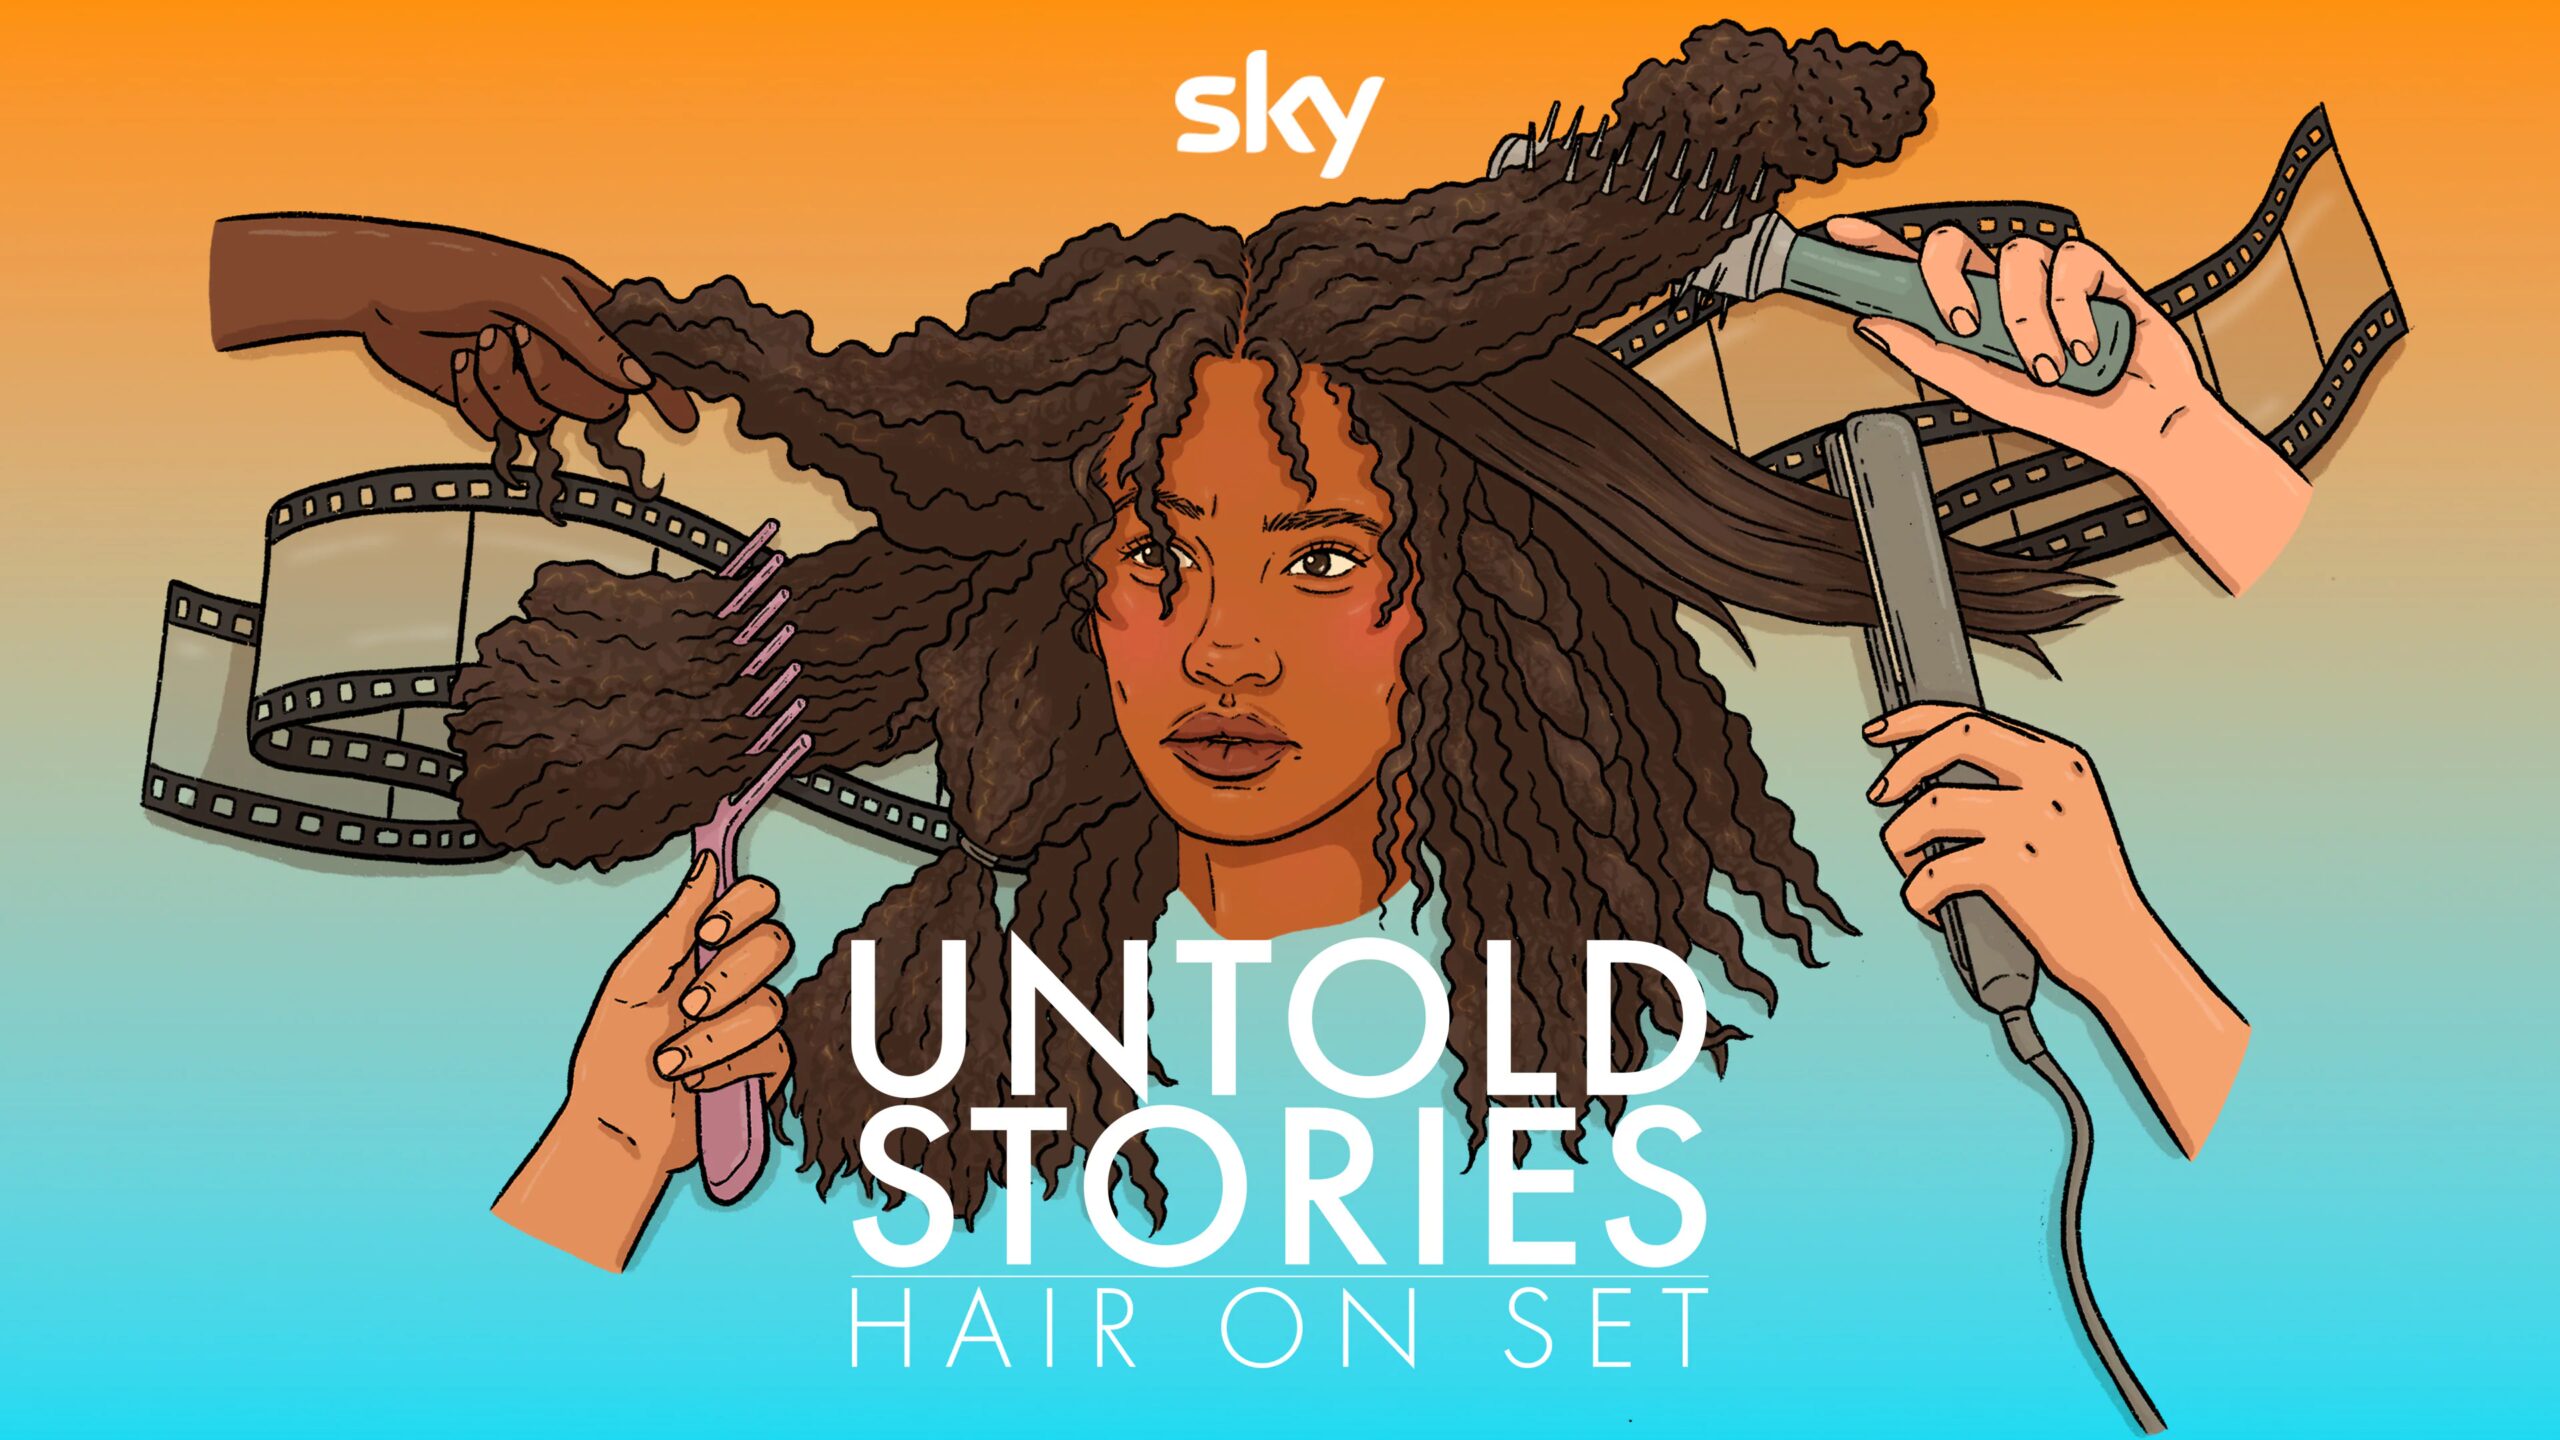 Sky acquires "Untold Stories: Hair On Set" from actress Fola Evans-Akingbola - to air on October 1